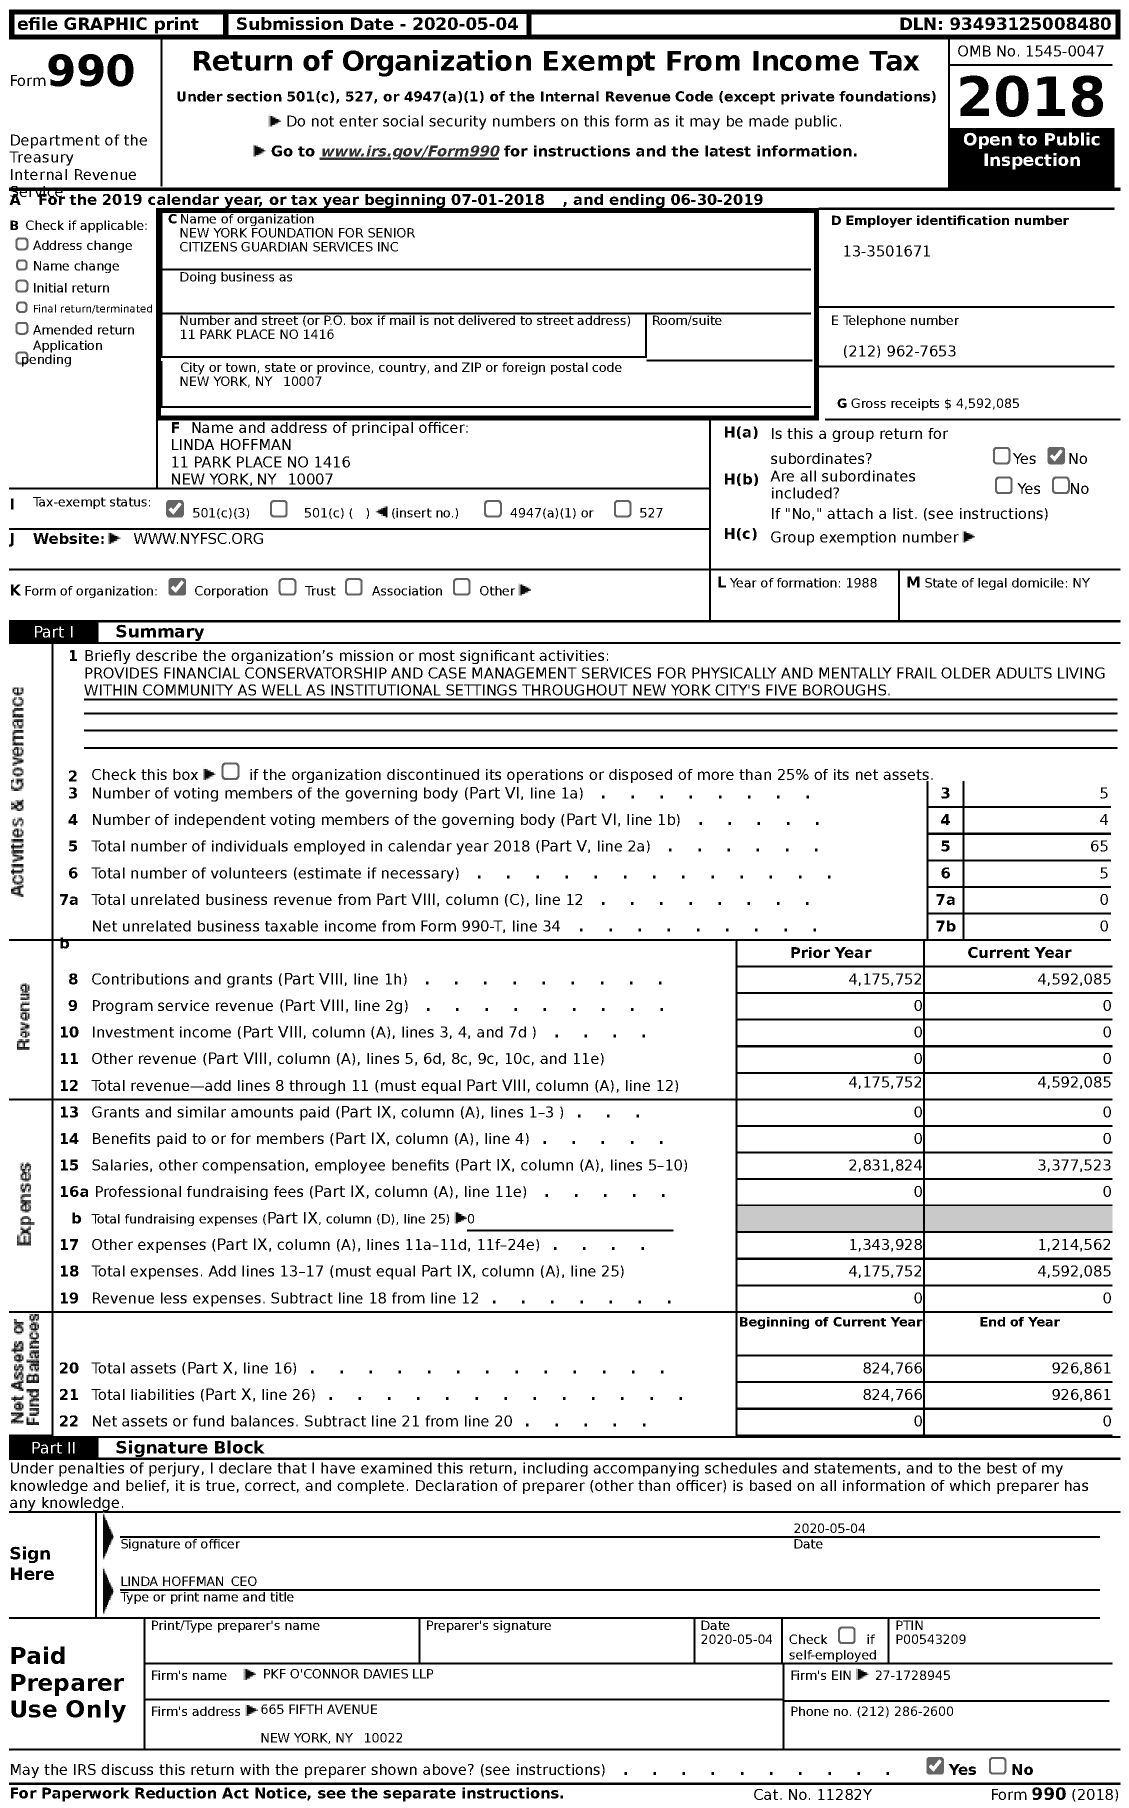 Image of first page of 2018 Form 990 for New York Foundation for Senior Citizens Guardian Services (NYFSC)